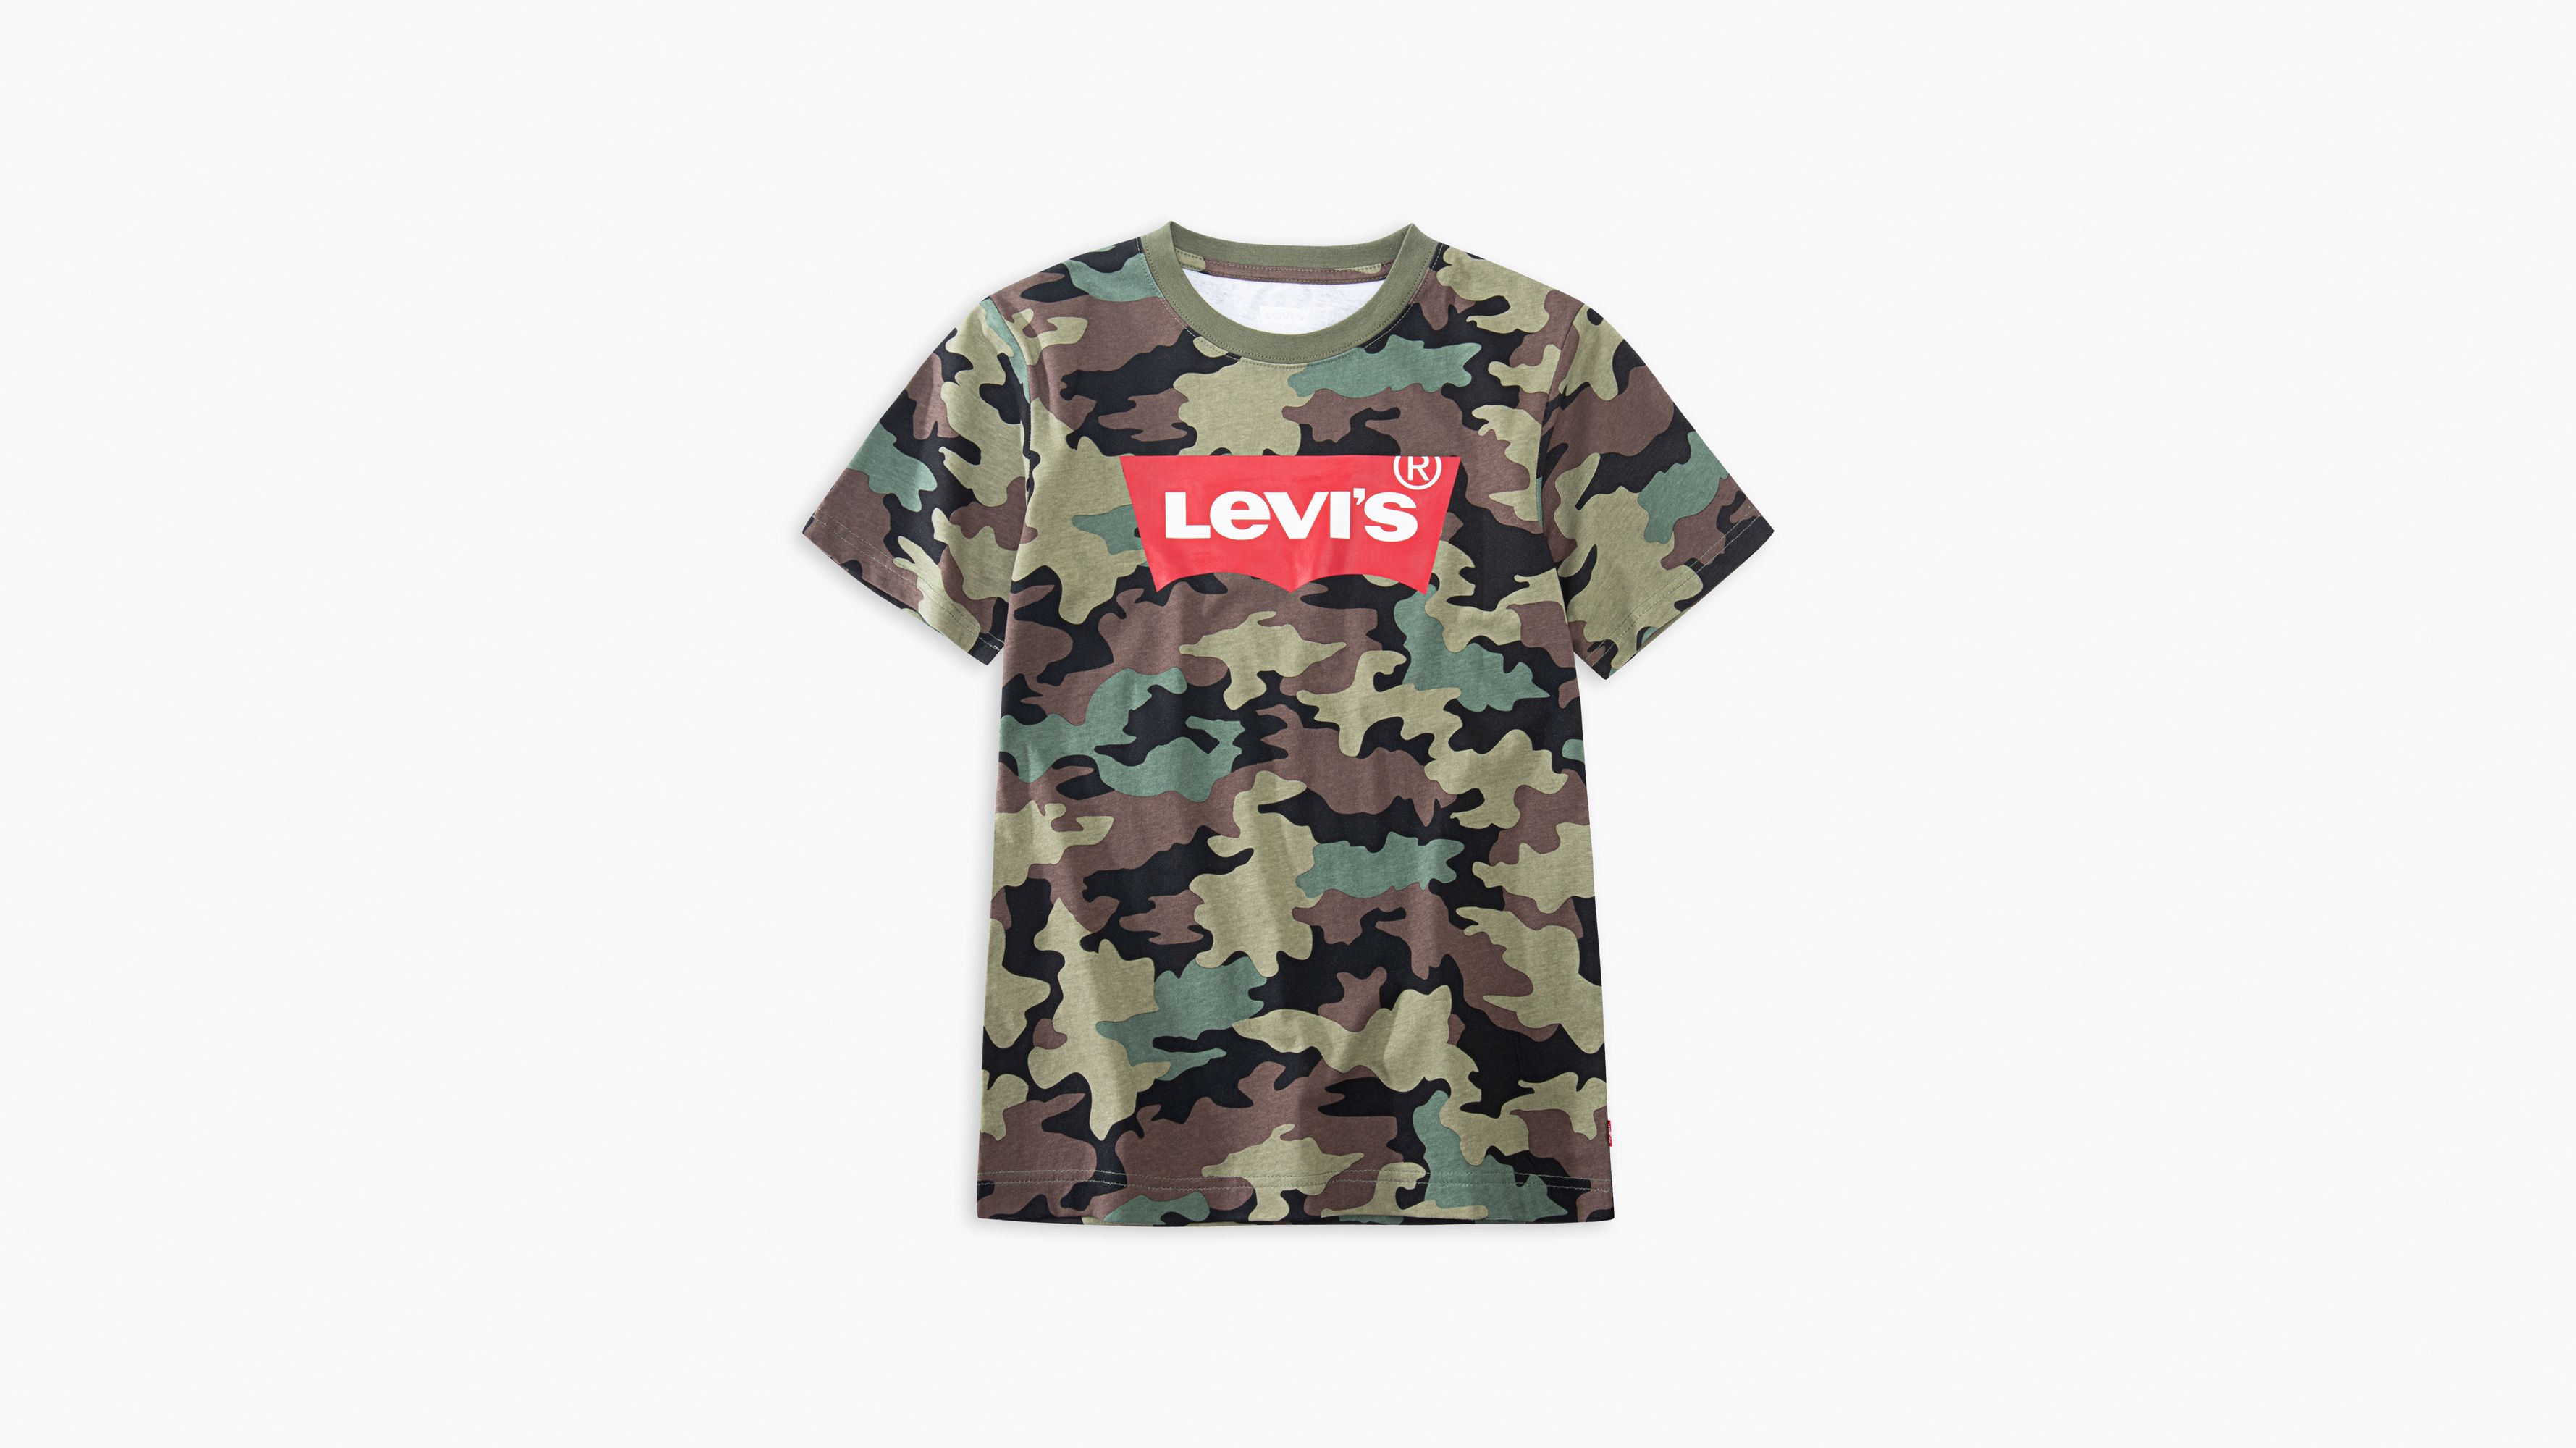 levis army t shirt